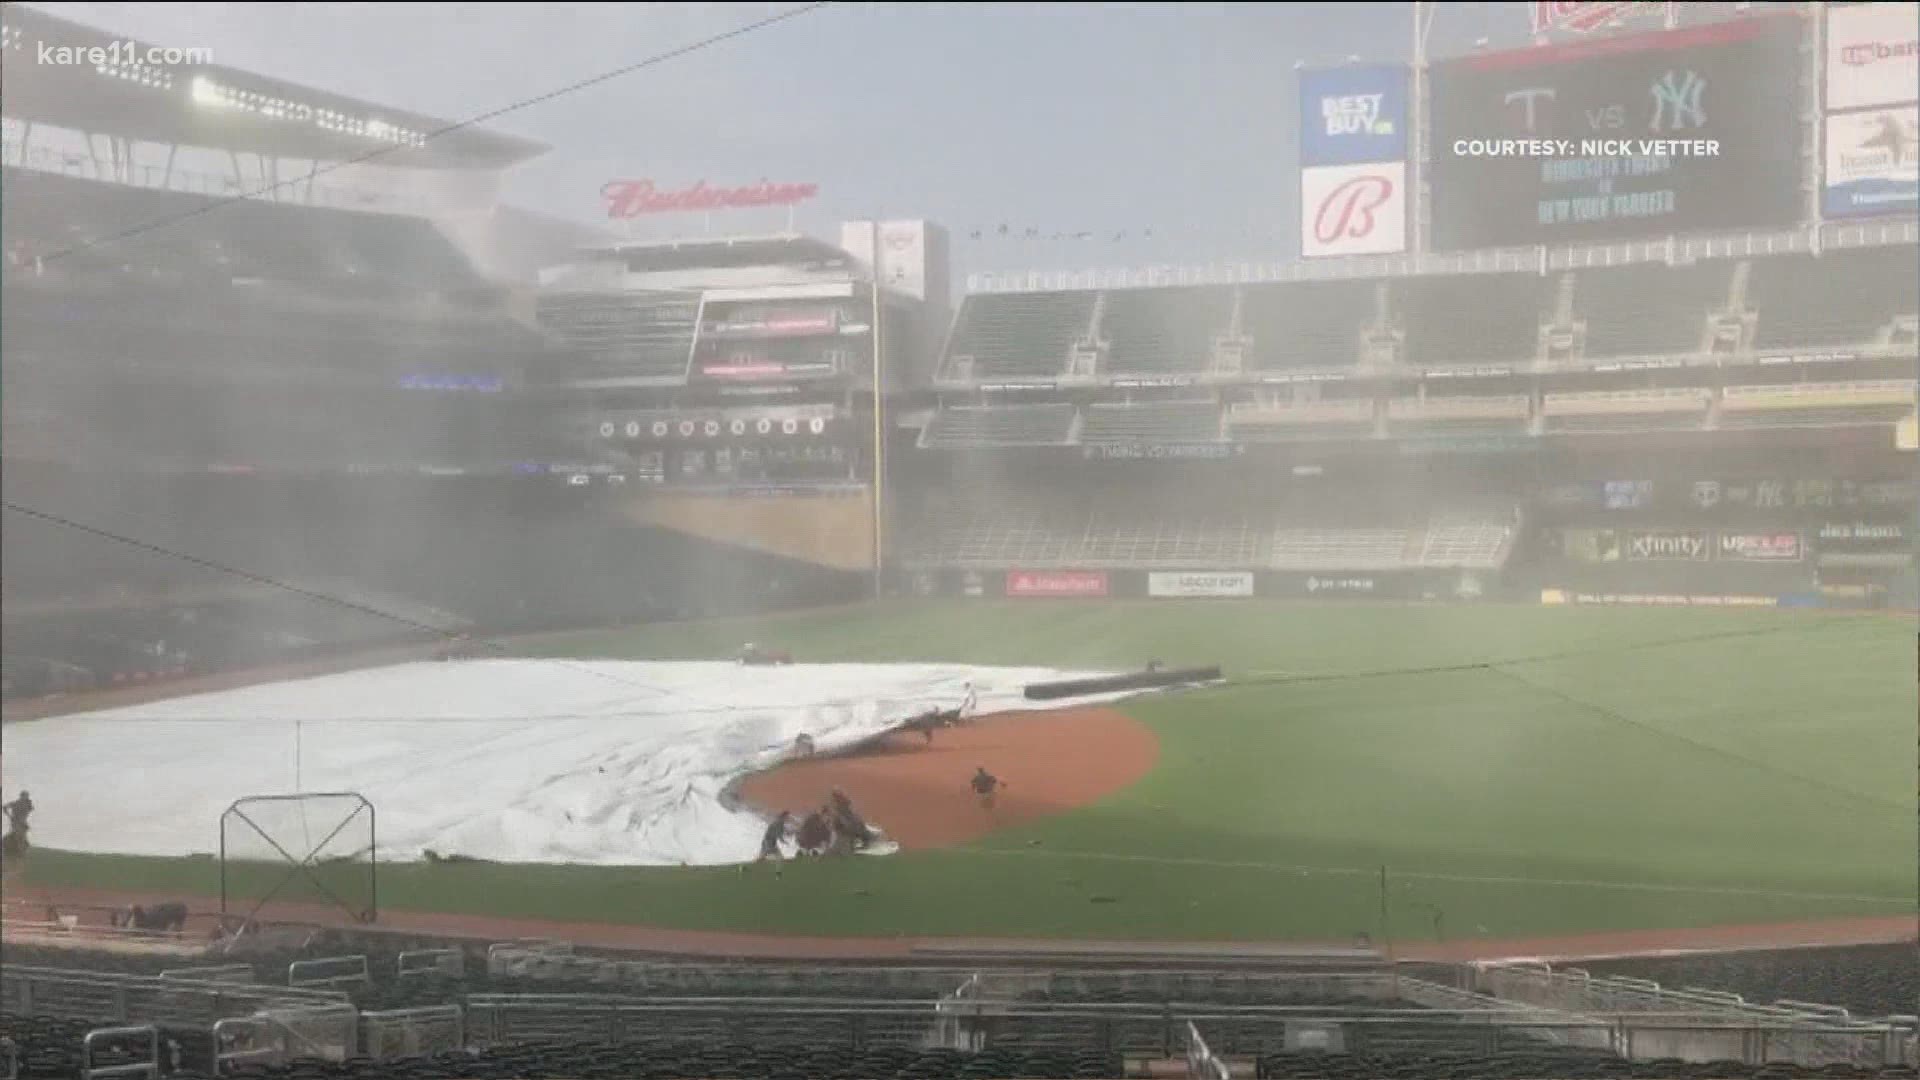 Winds were so strong the Twins almost lost the tarp off their field